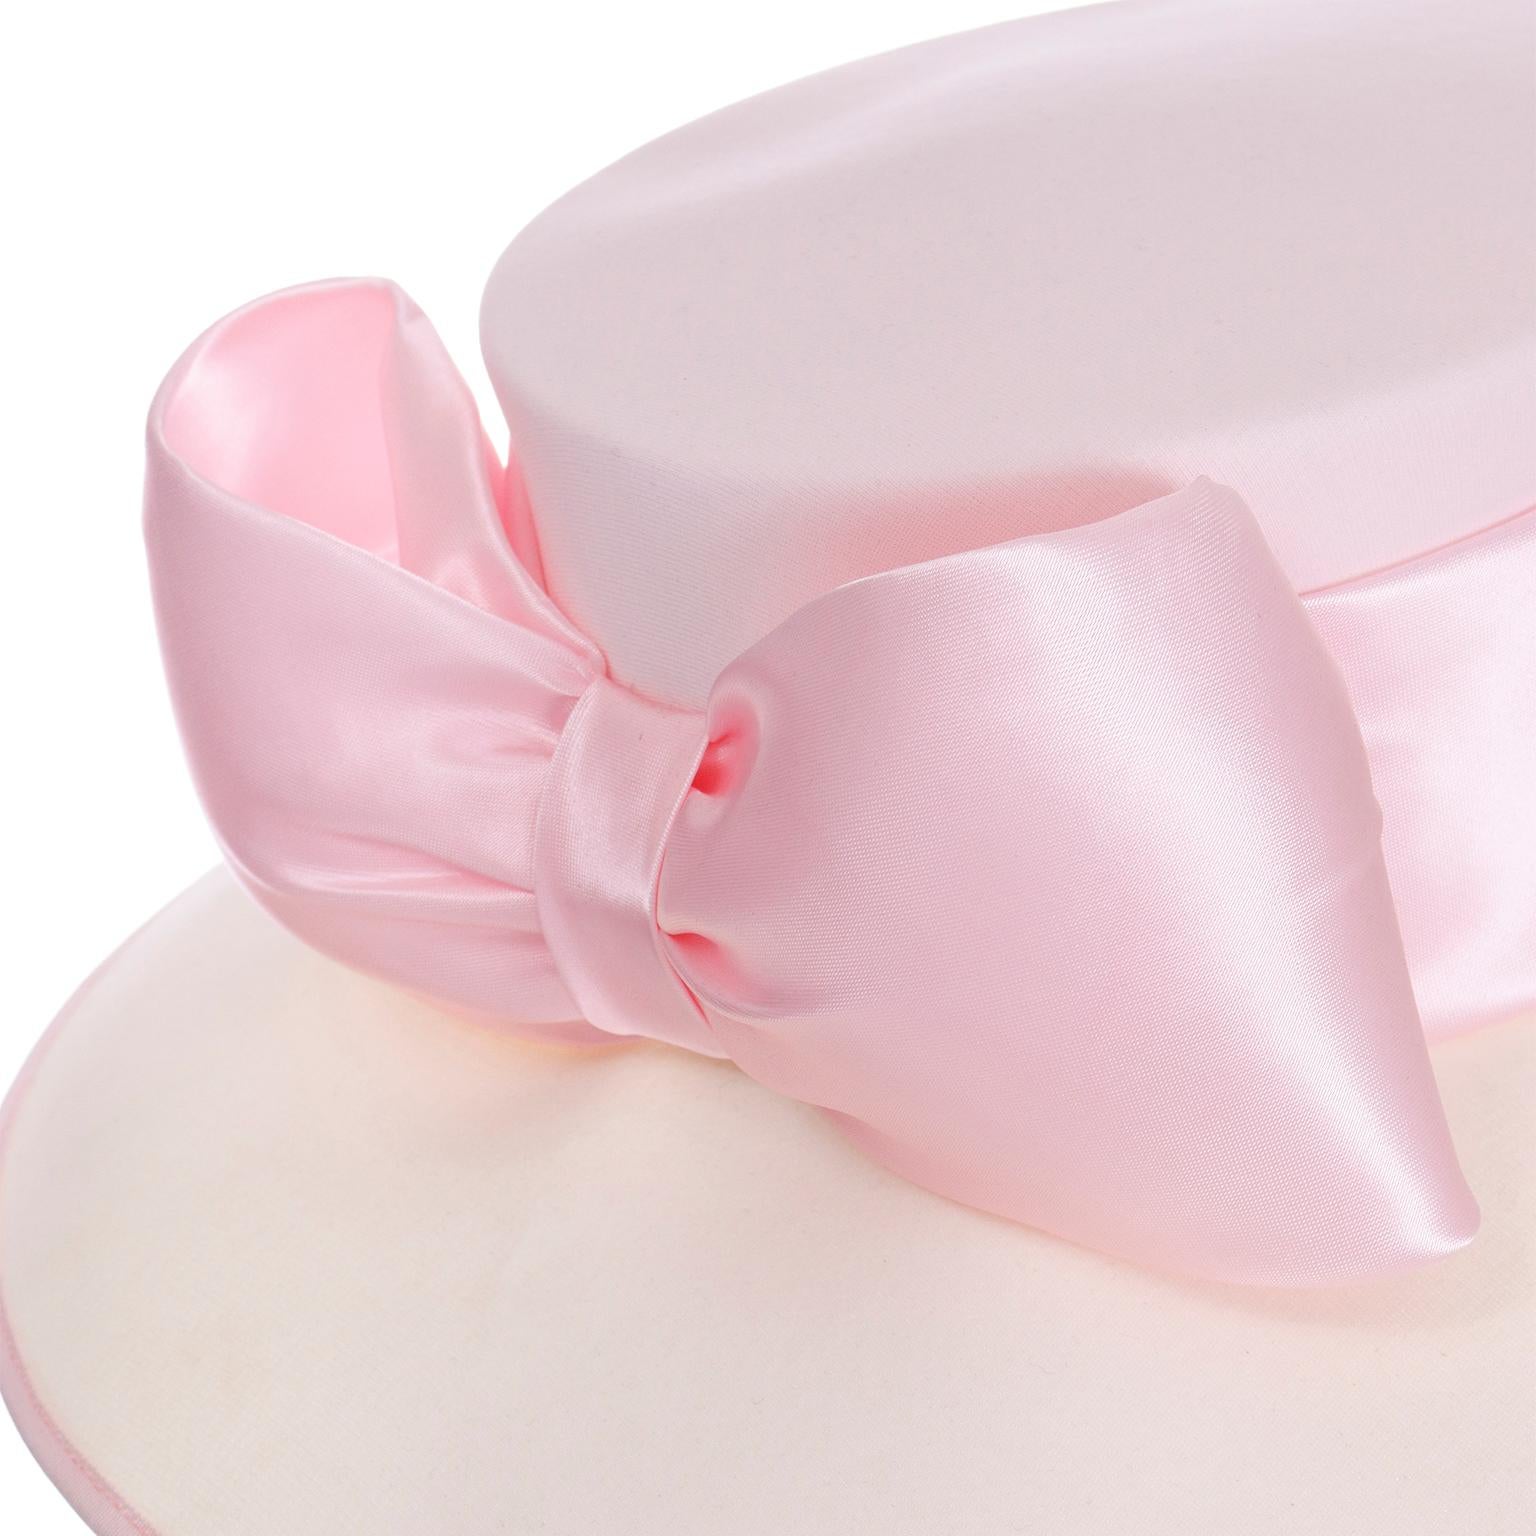 Peter Bettley London Cream Wide Brim Hat With Pink Satin Bow & Ribbon In Excellent Condition For Sale In Portland, OR